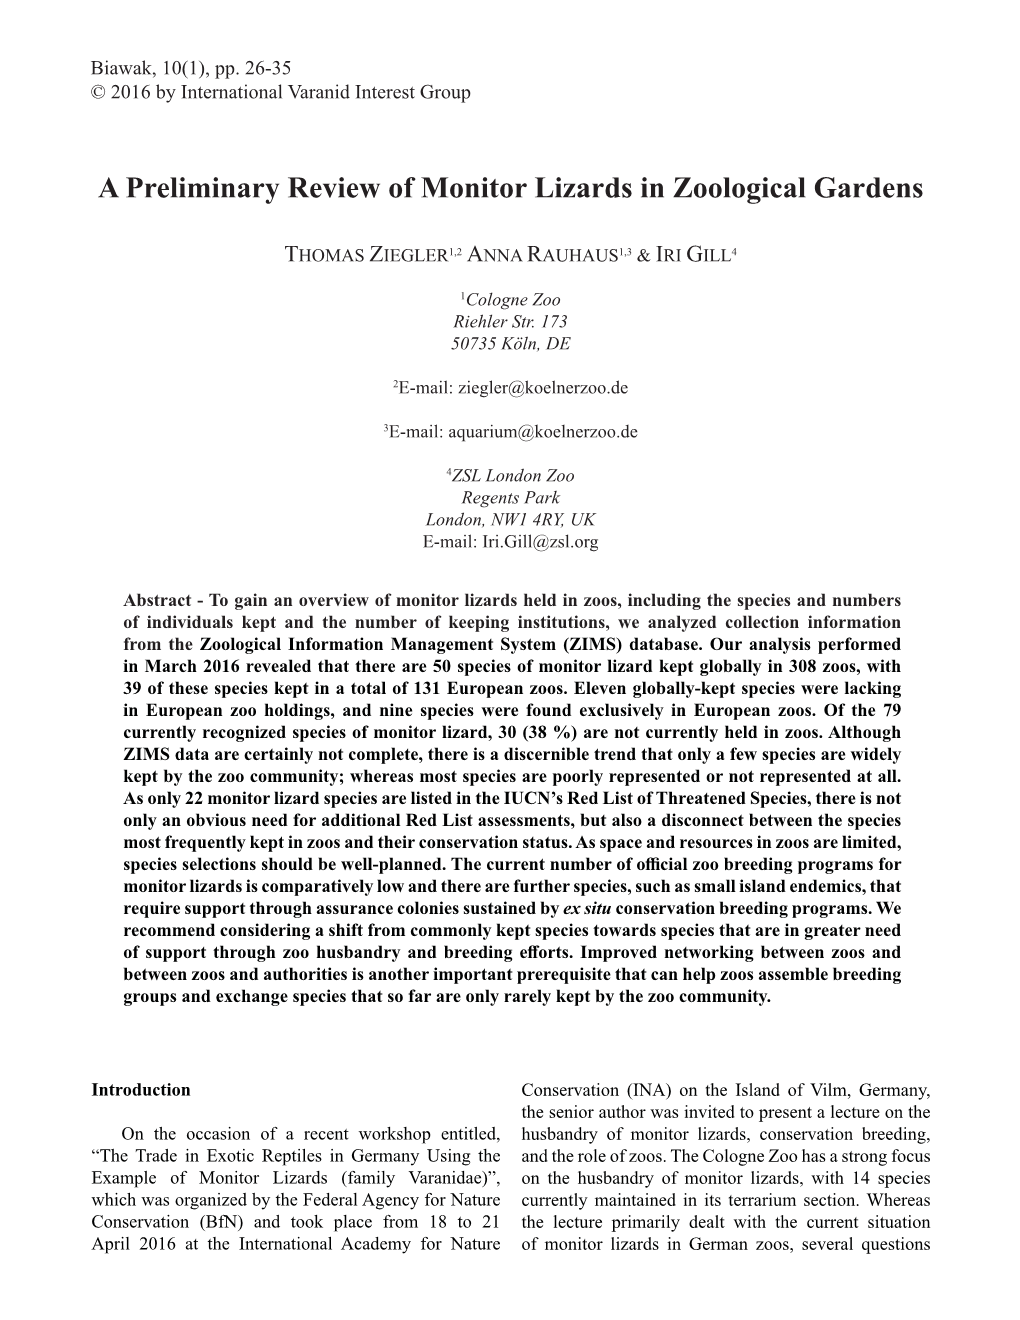 A Preliminary Review of Monitor Lizards in Zoological Gardens